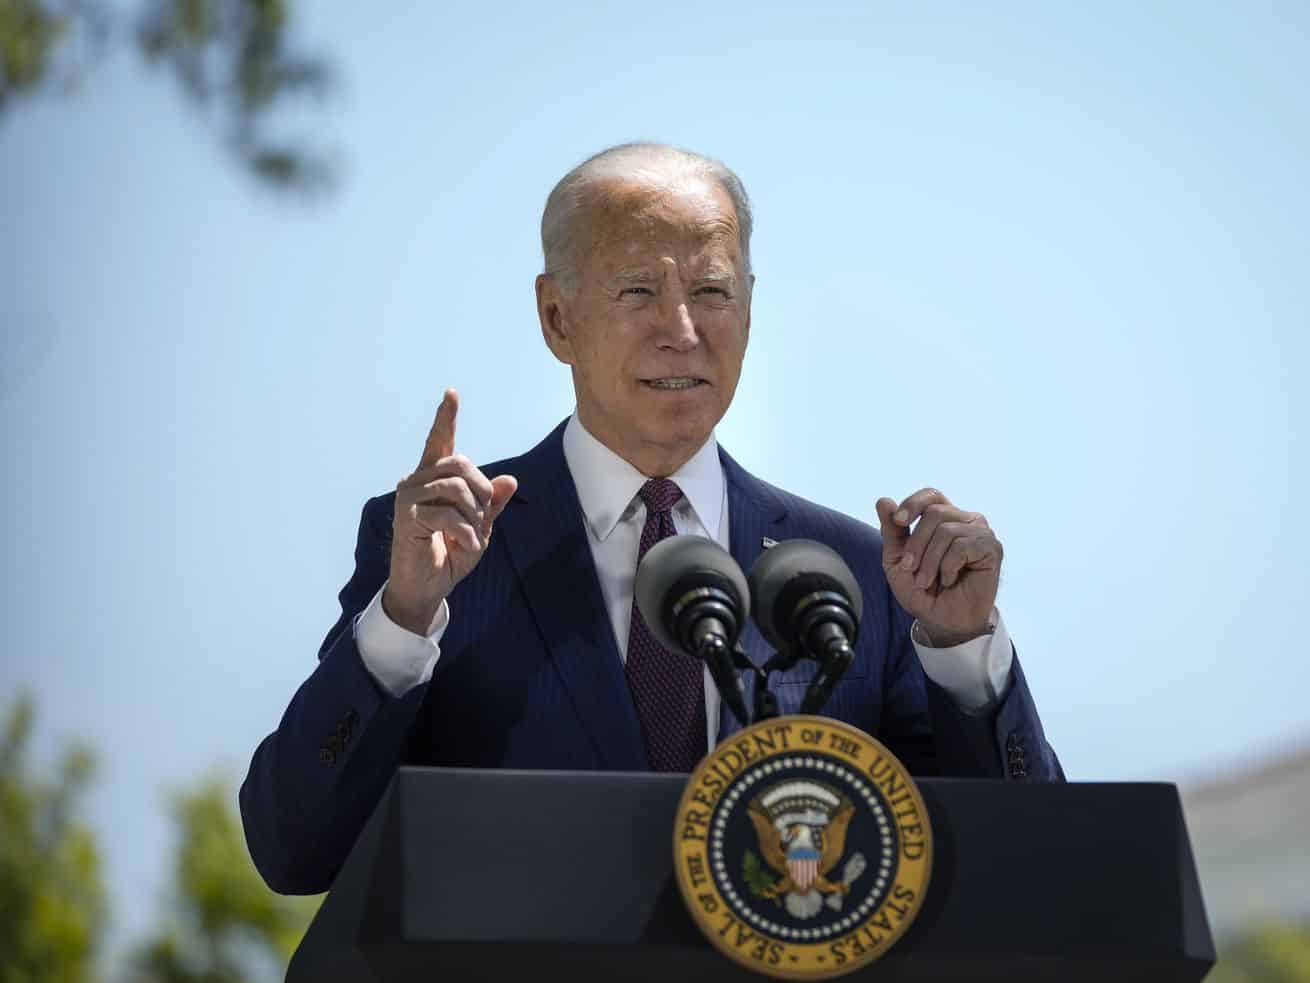 Biden takes aim at American inequality by investing $1.8 trillion in families